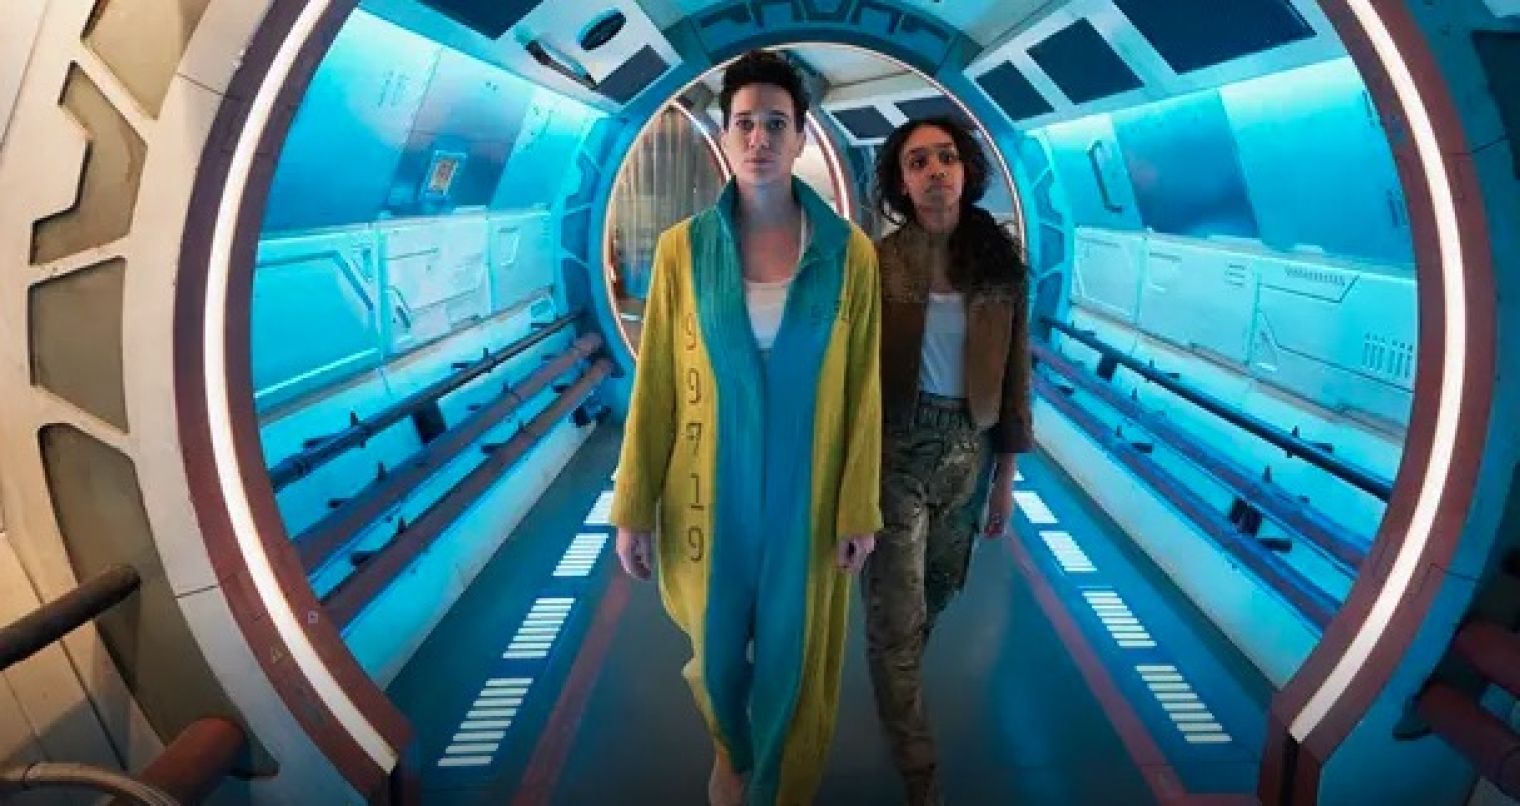 New Sky One sci-fi drama 'Intergalactic' stars Imogen Daines as fugitive, Verona. All episodes streaming from 30th April.